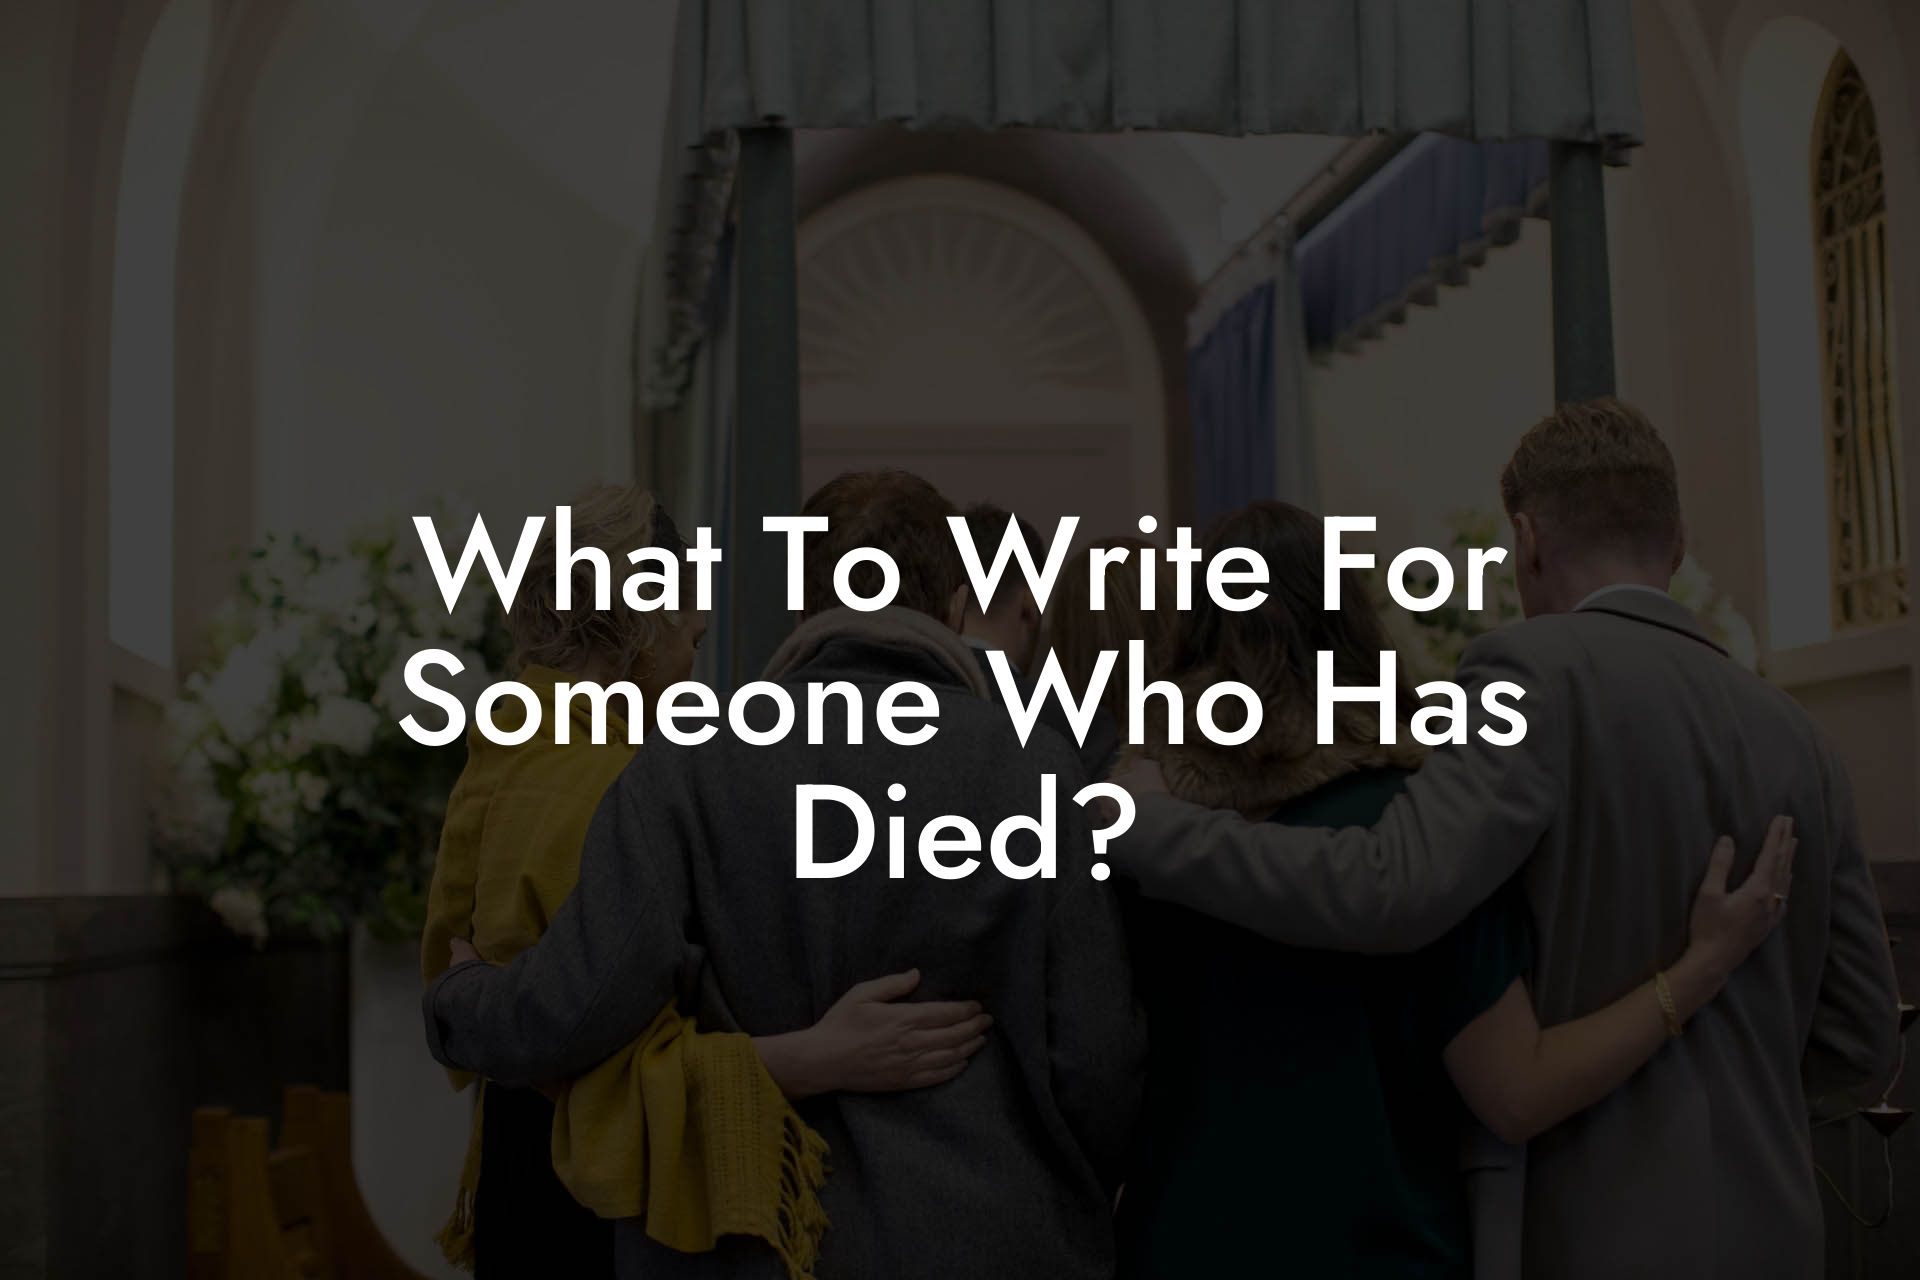 What To Write For Someone Who Has Died?